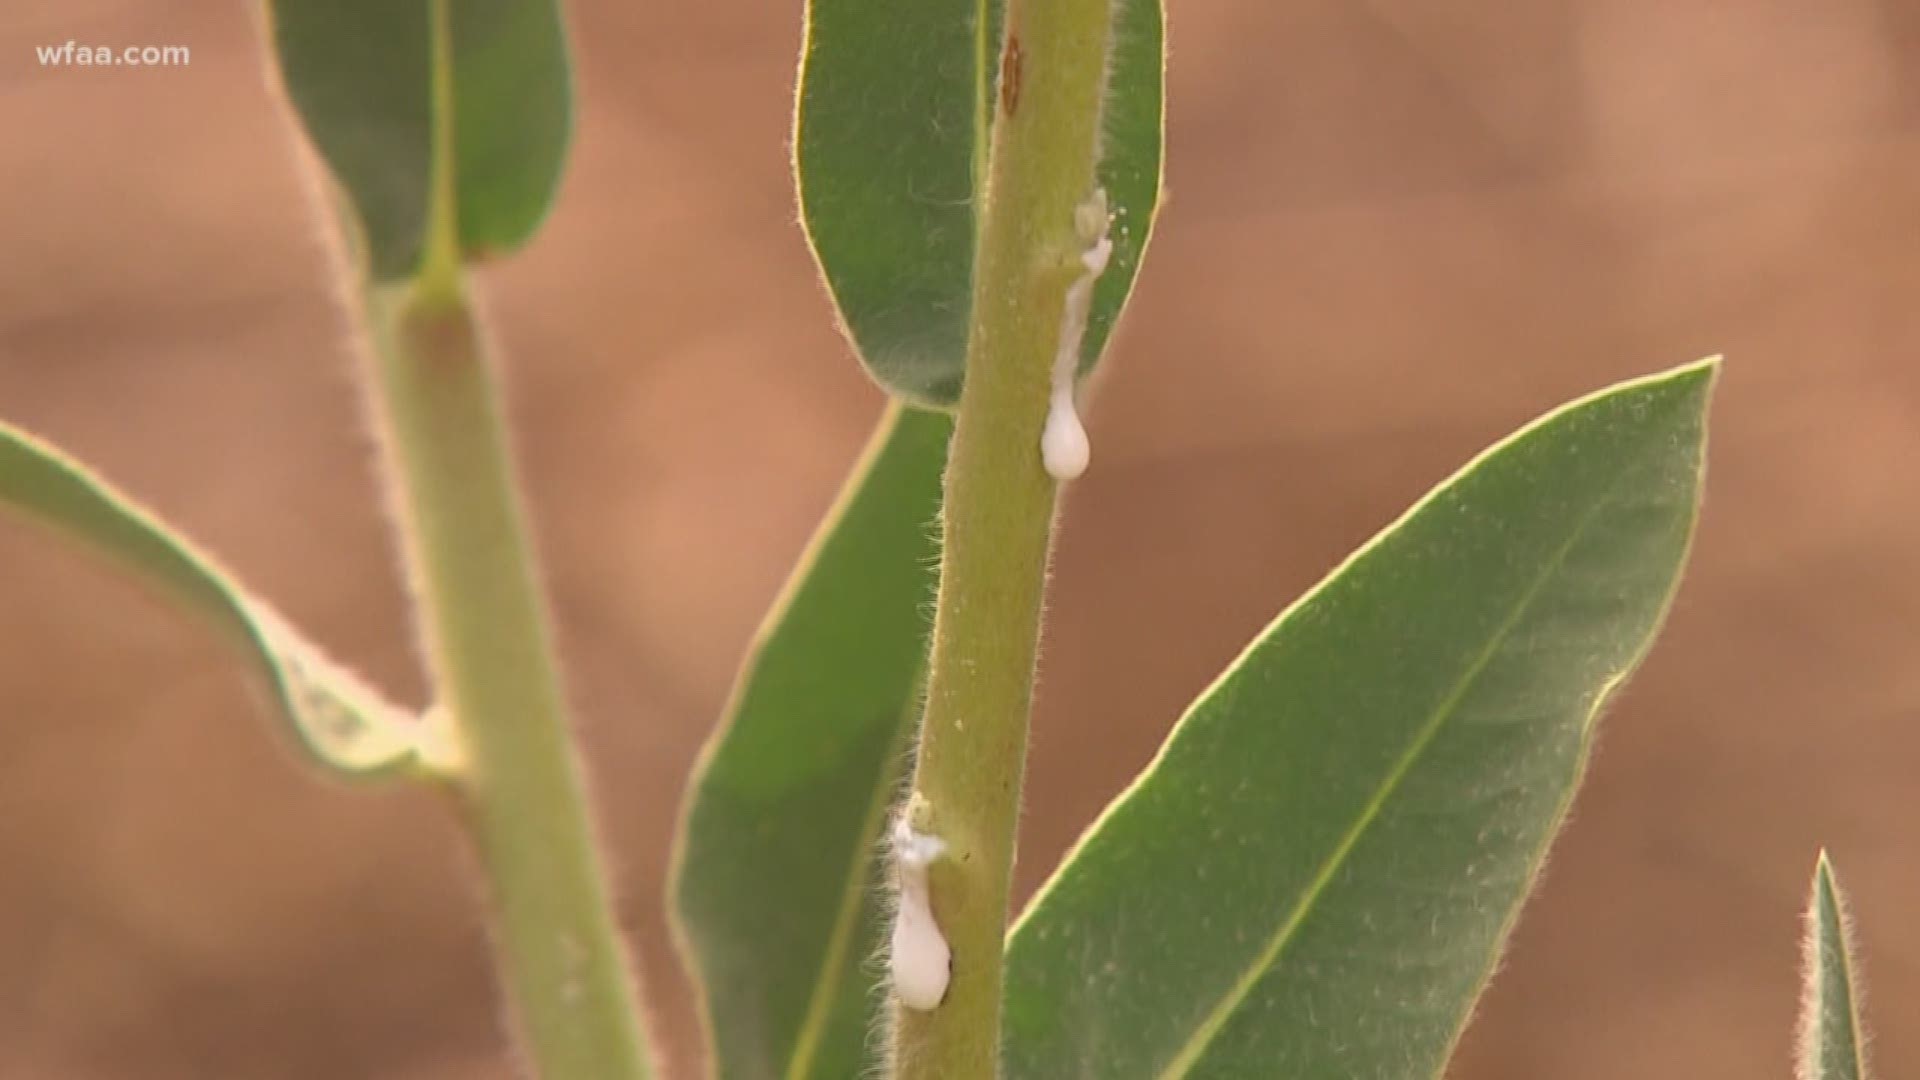 Researchers from Texas Woman’s University say a chemical found in a native Texas plant appears to stop pain without causing addiction.